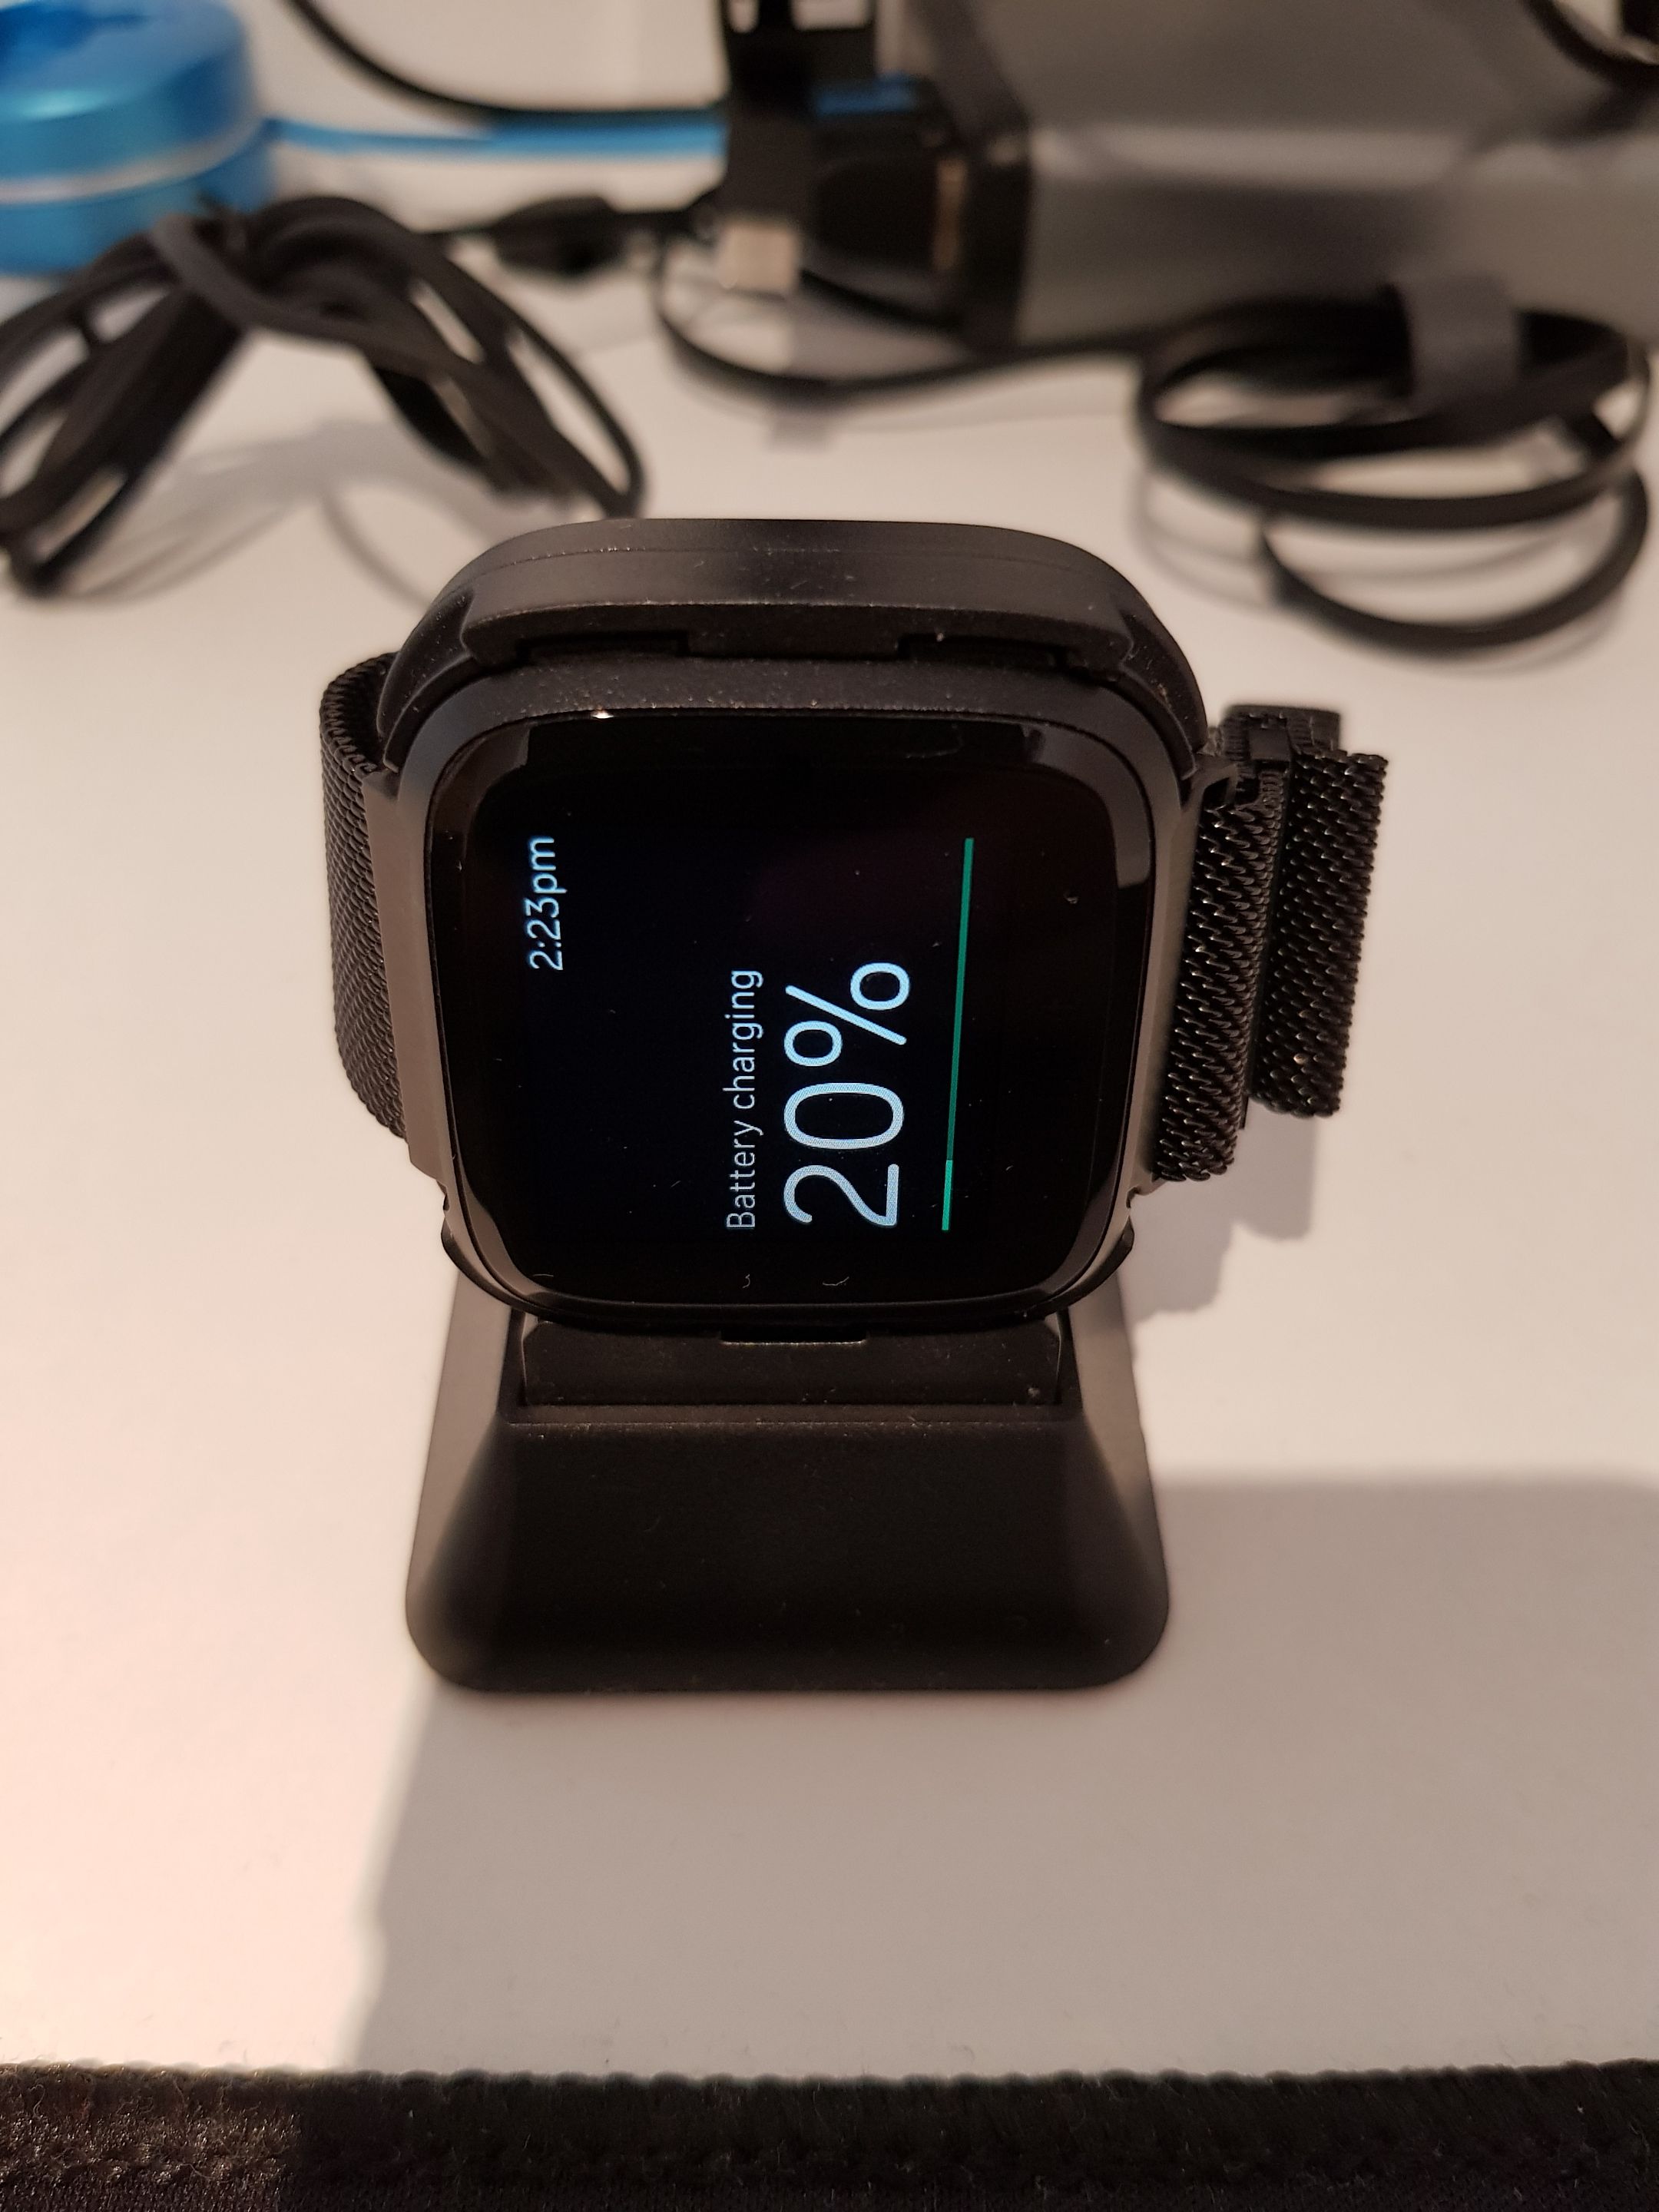 does the fitbit versa charger work with versa 2